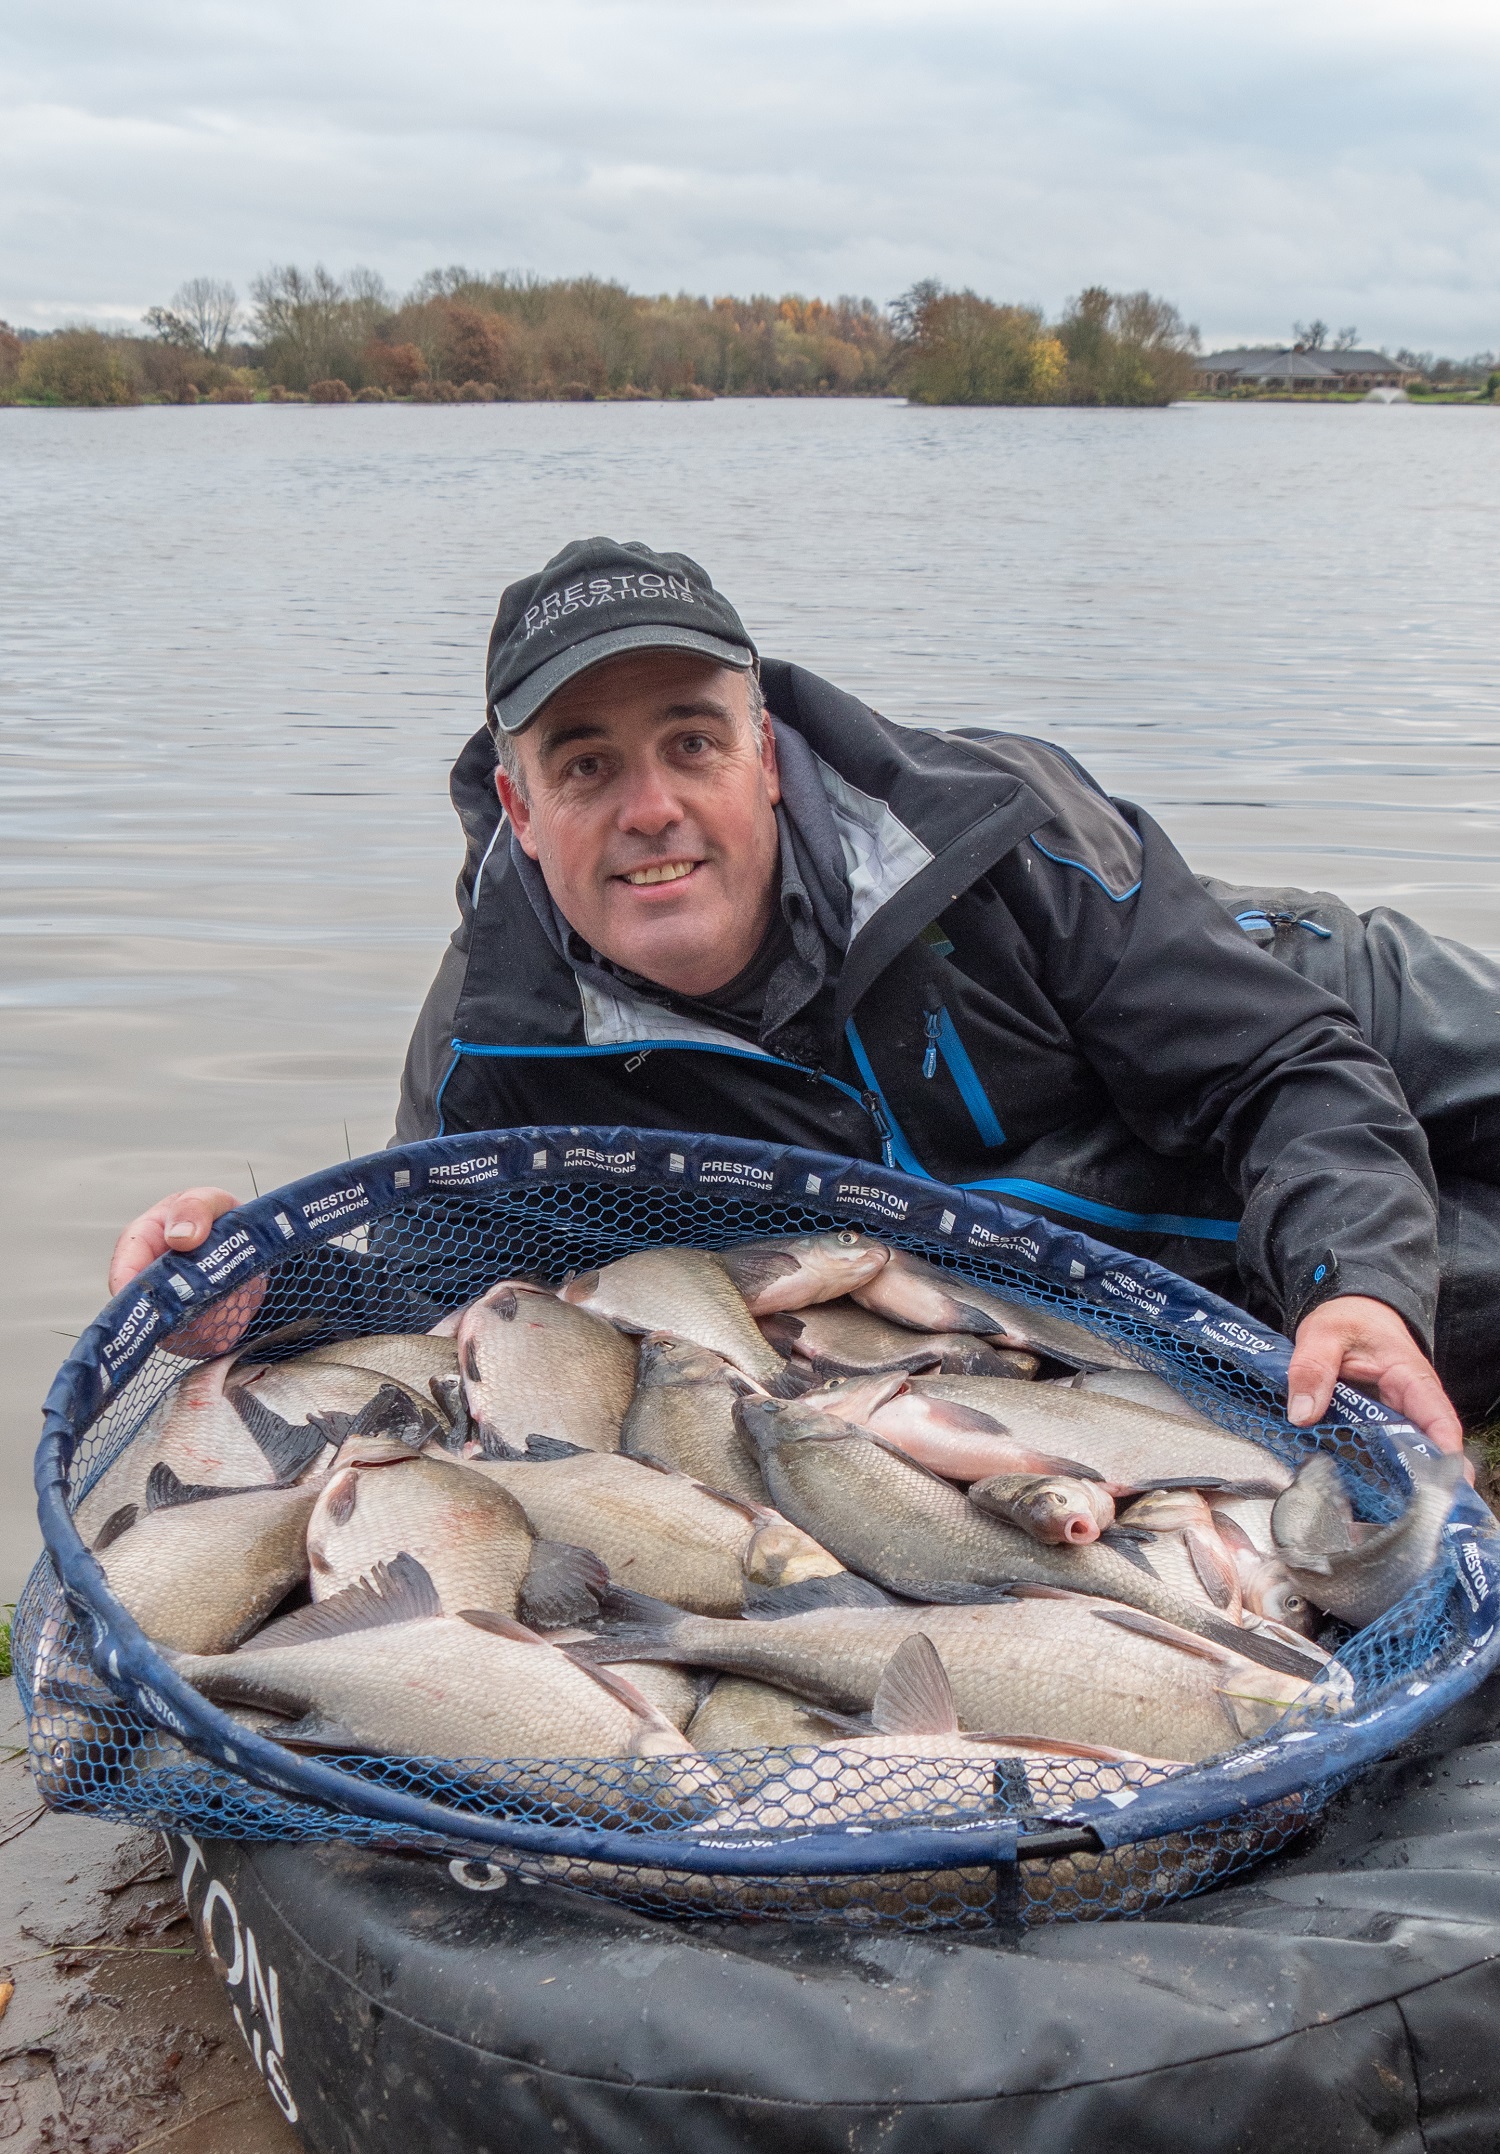 Des with a heavy load of fish he caught after his session